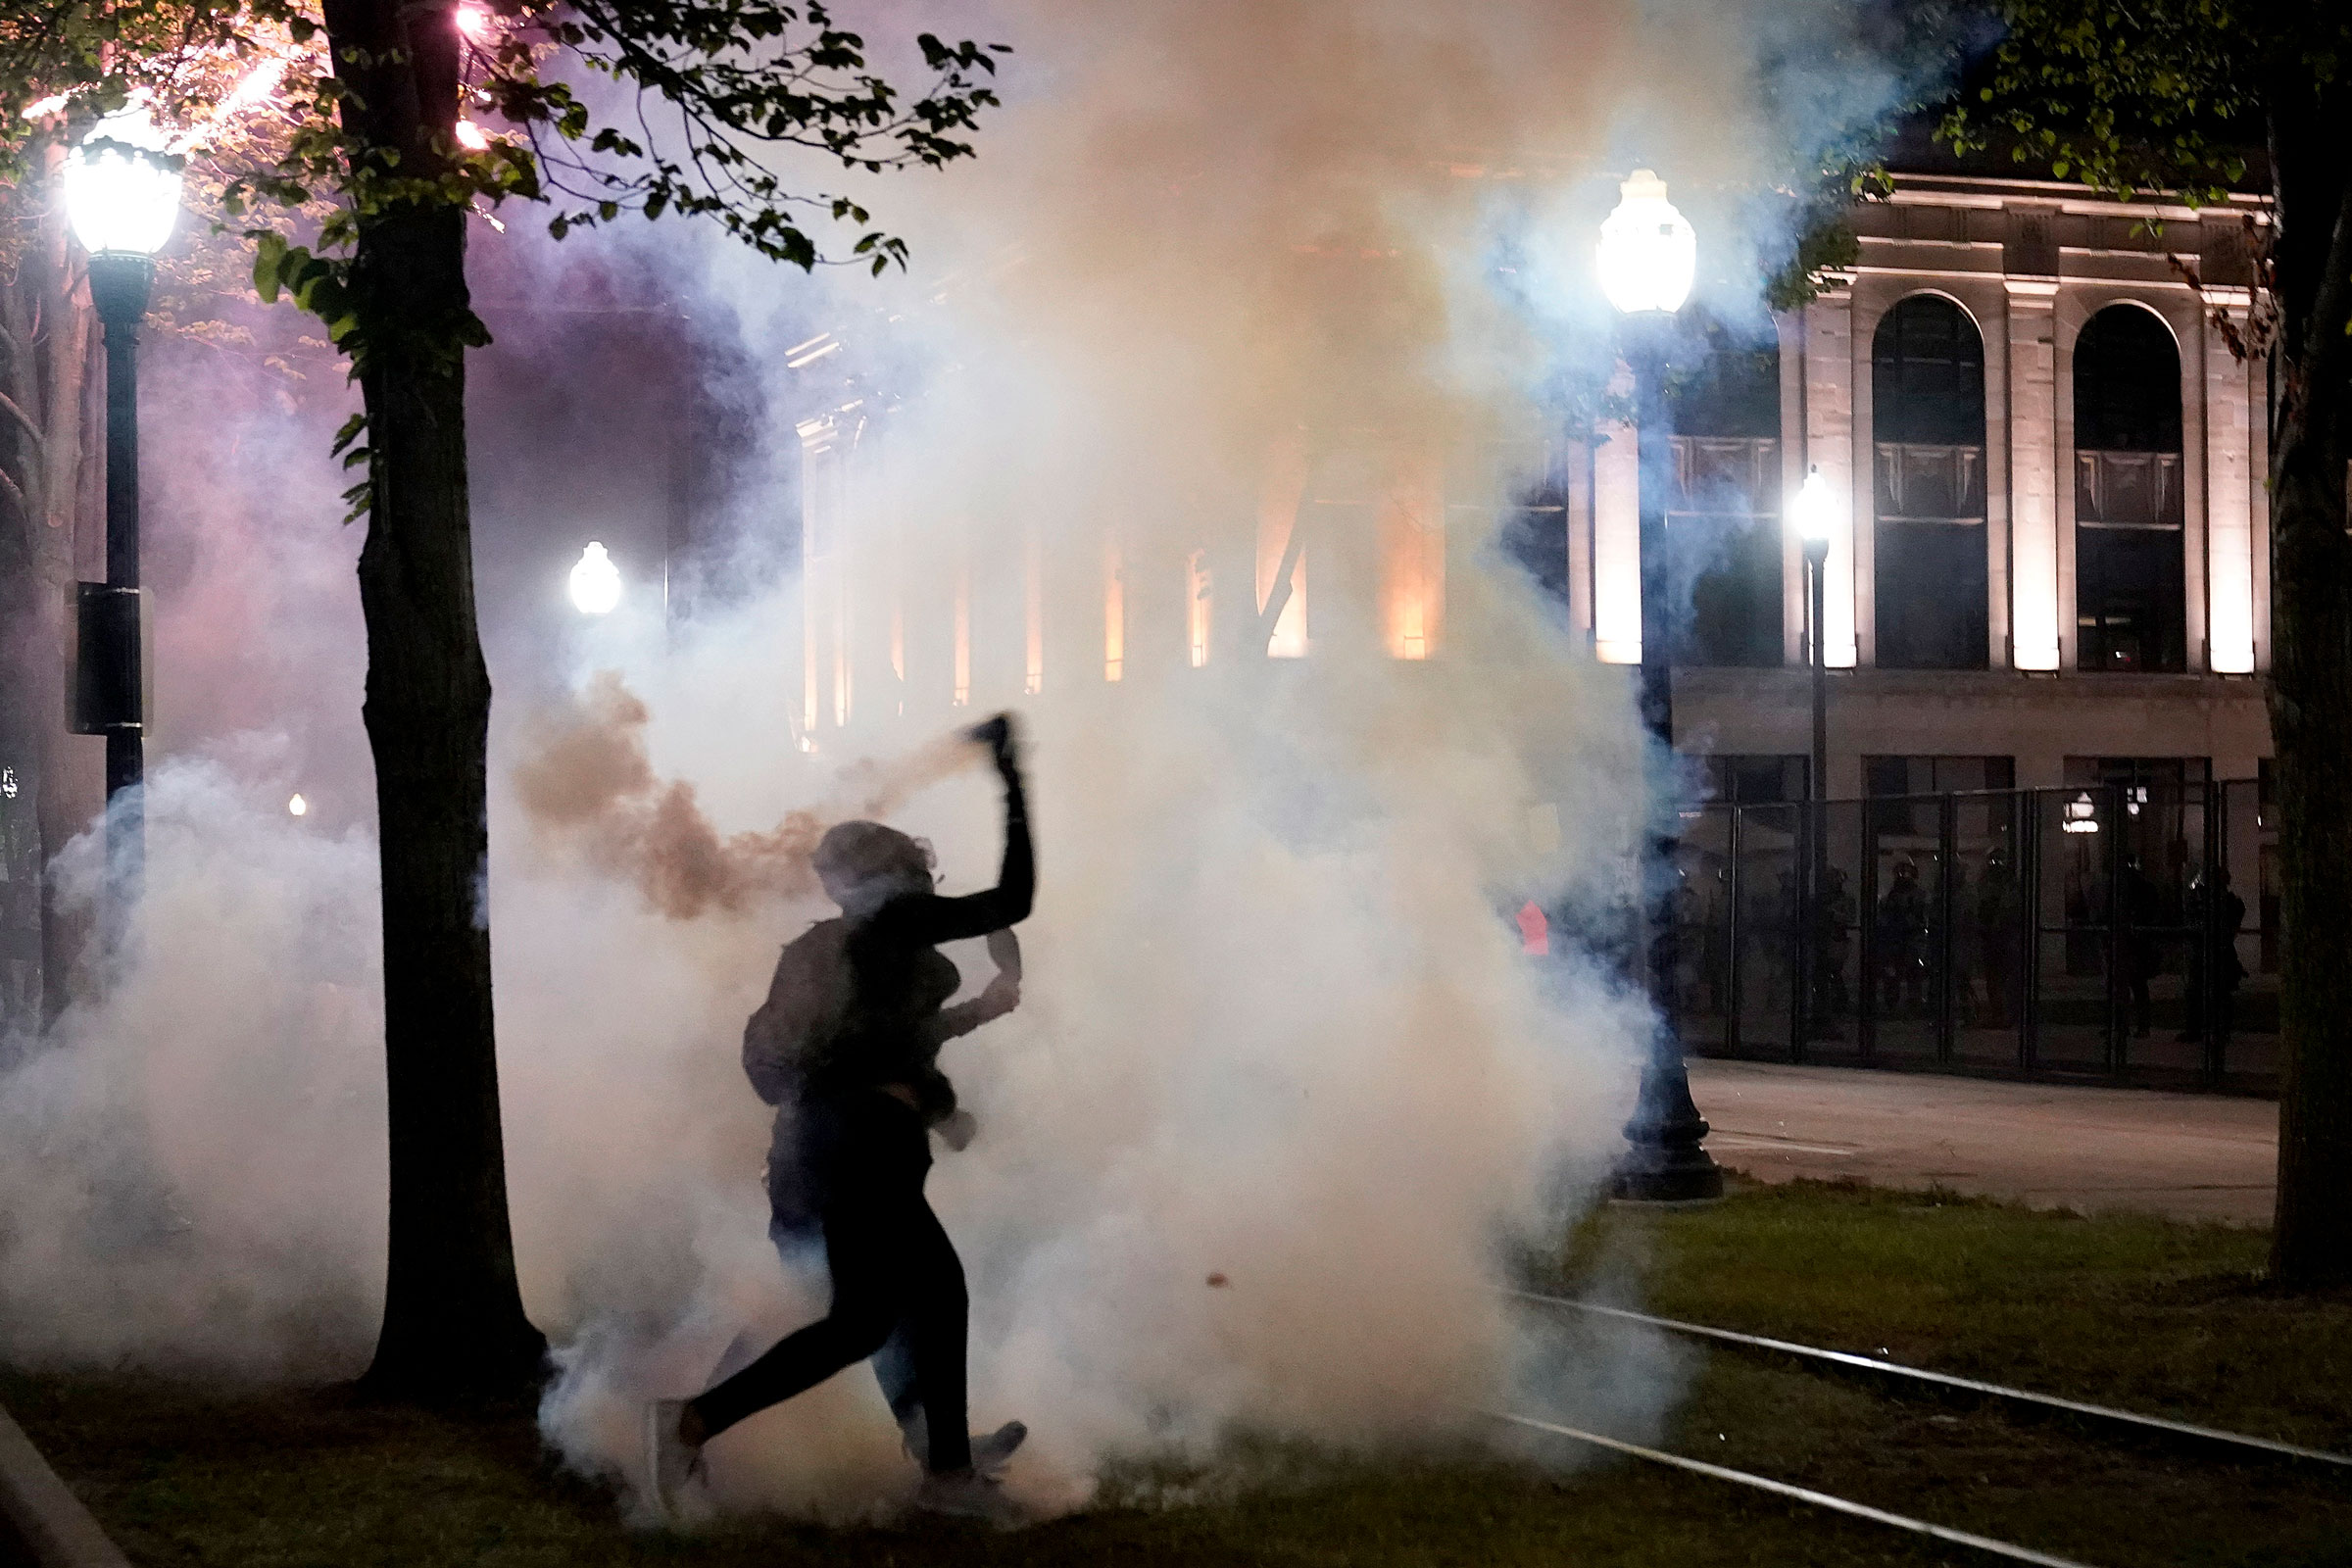 A protester throws back a can of smoke toward law enforcement during clashes outside the Kenosha County Courthouse on Aug. 25, 2020, in Kenosha, Wis. Protests continue following the police shooting of Jacob Blake two days earlier.